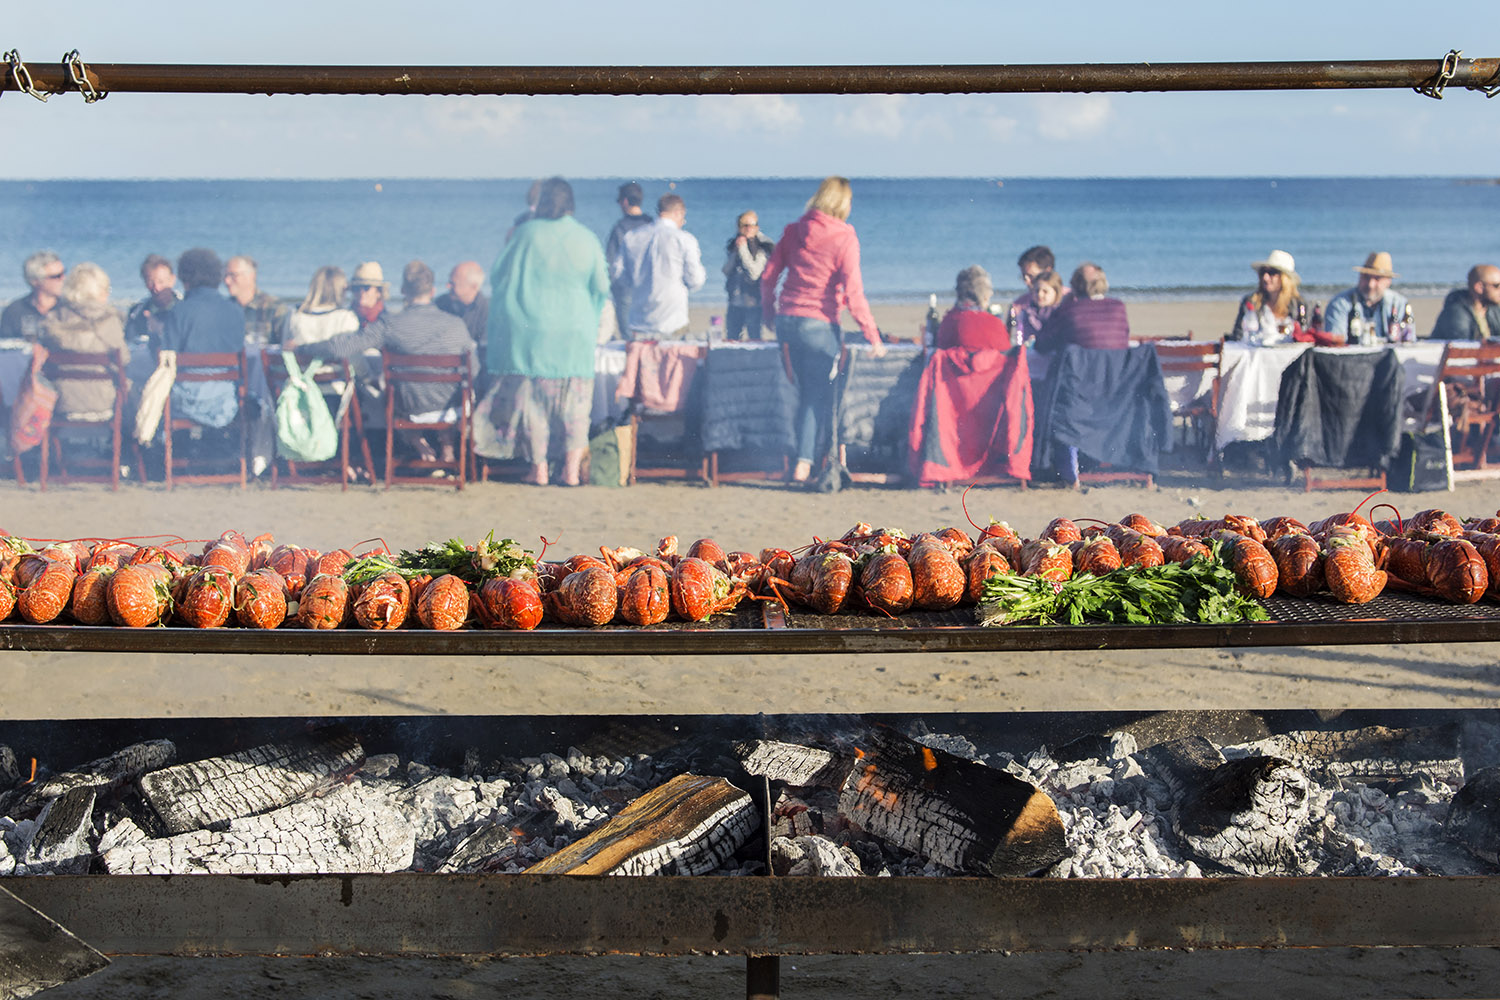 View of large wood fired grill on Porthcurnick Beach with lobsters cooking in the foreground and diners at a long table in the background